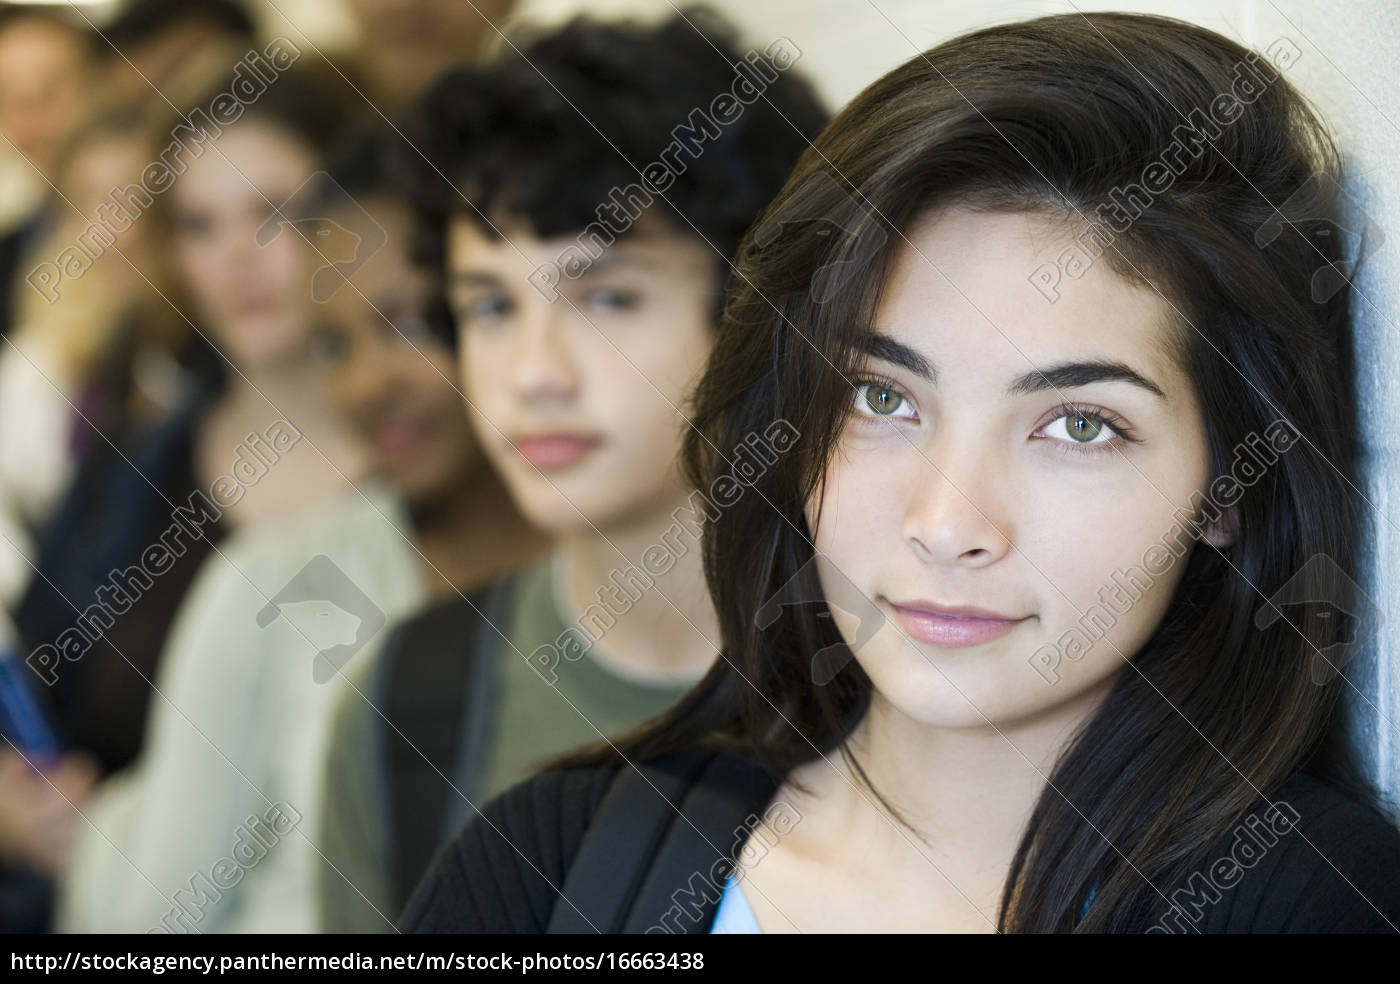 Stock Image 16663438 Teenage Girl Waiting At Front Of Line Portrait